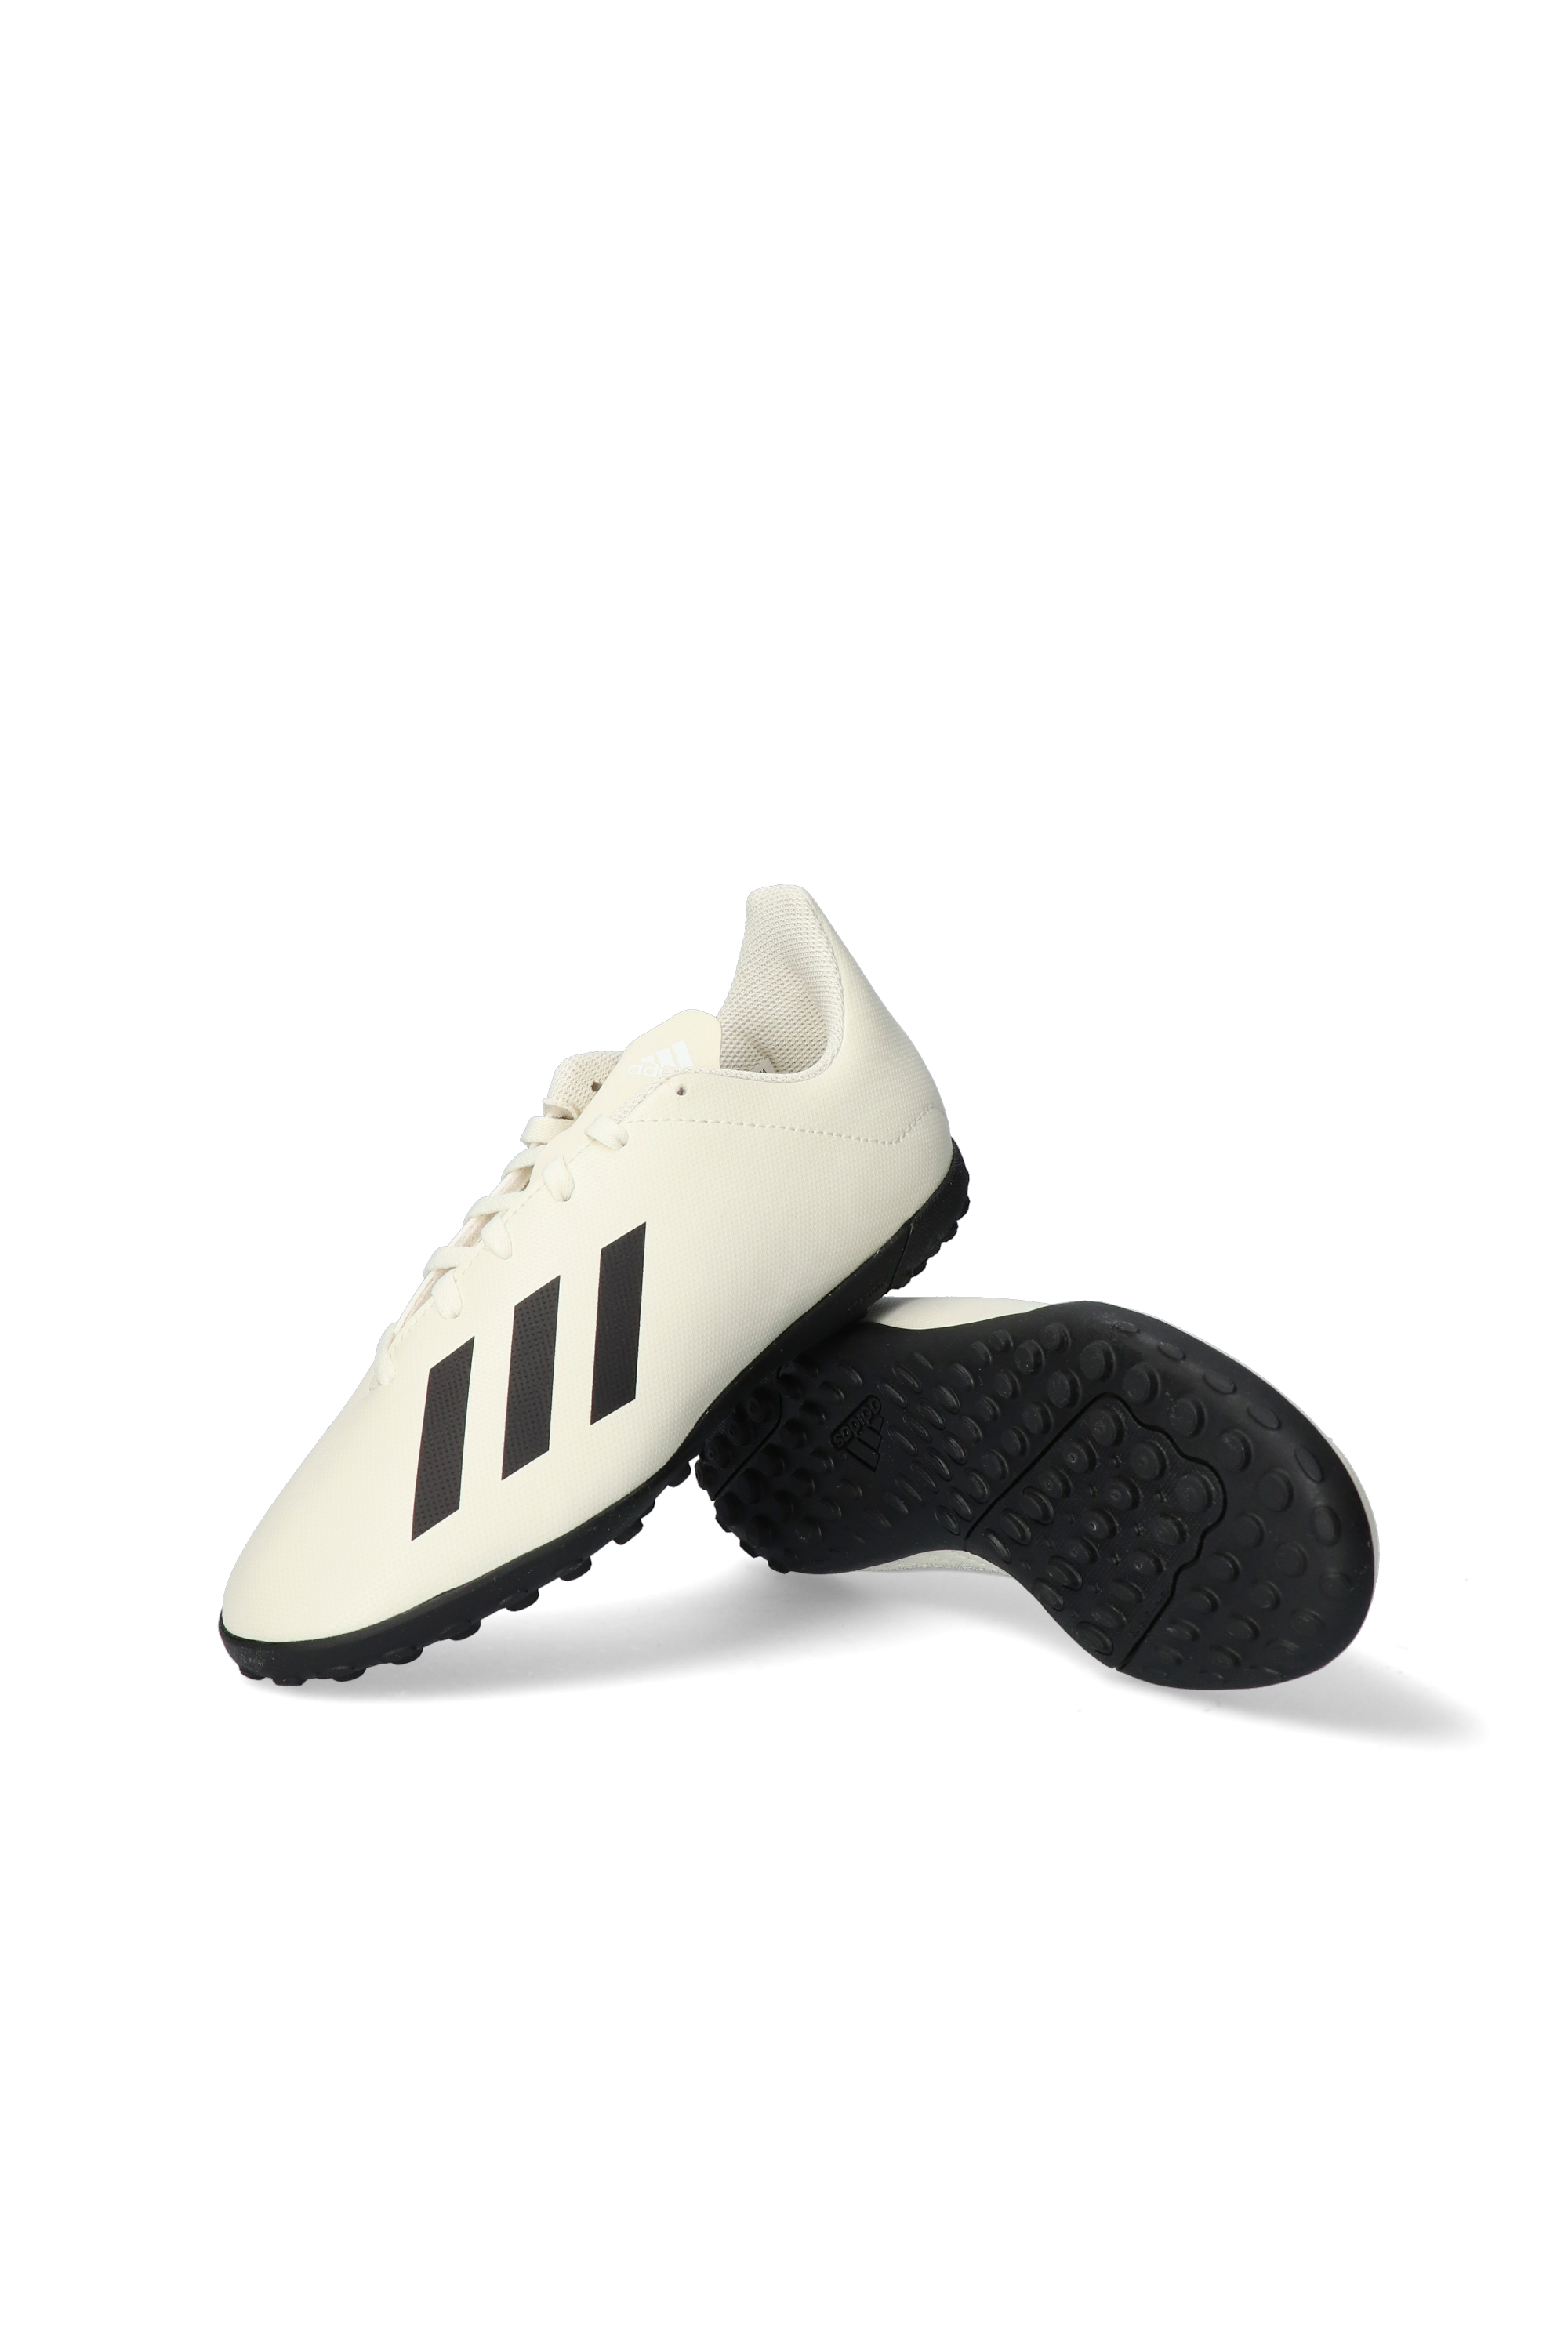 adidas spectral mode x 18.4 tf